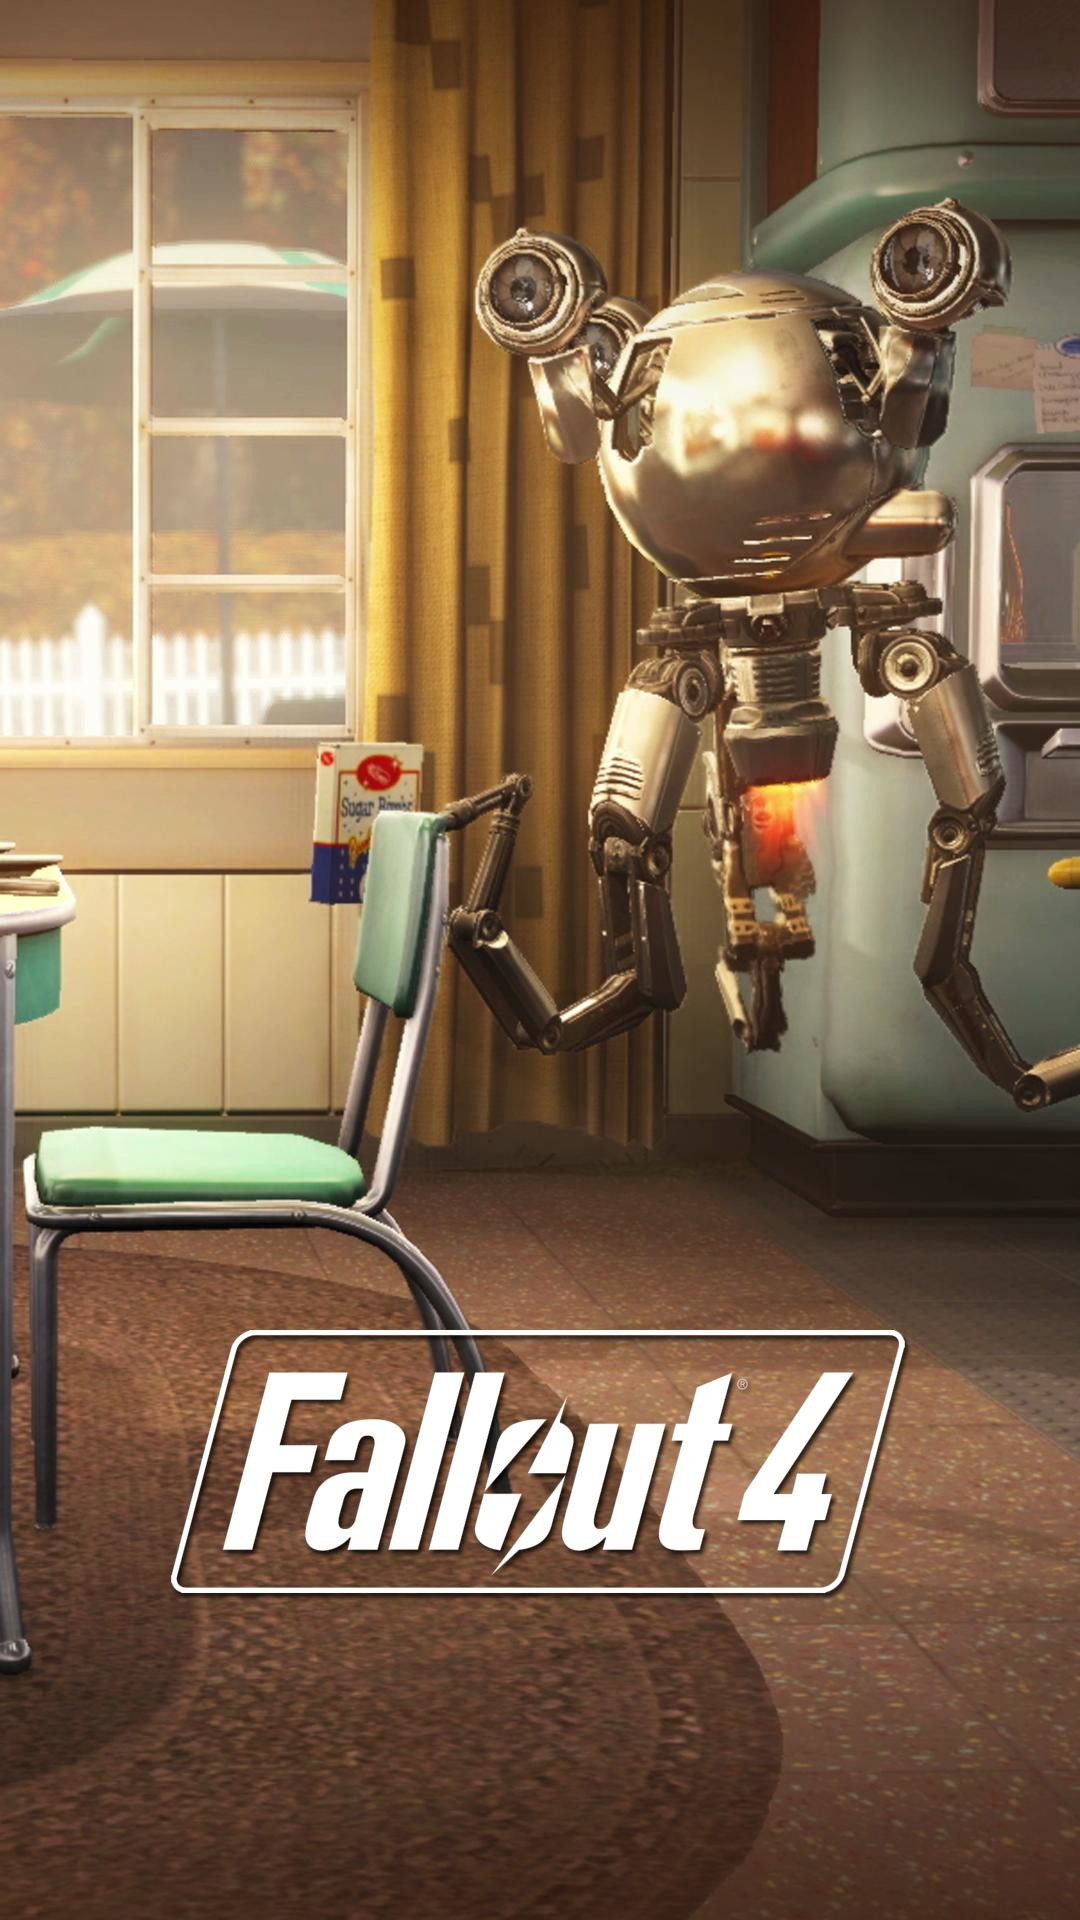 1080x1920 I made some Fallout 4 lock screen wallpapers from E3 stills